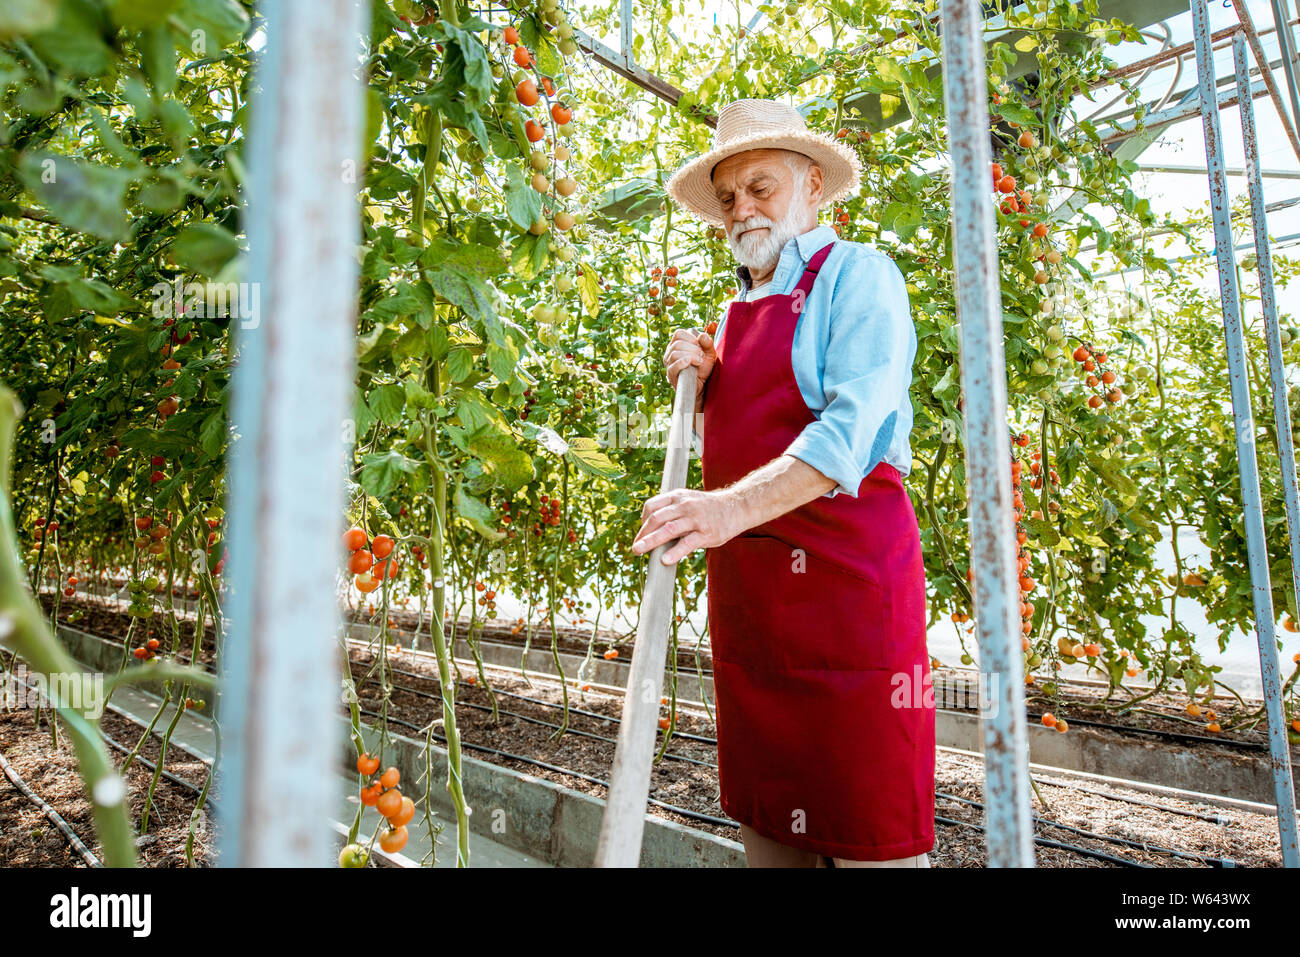 Senior man working on a small agricultural farm, growing cherry tomatoes in a well-equipped hothouse. Wide angle view Stock Photo